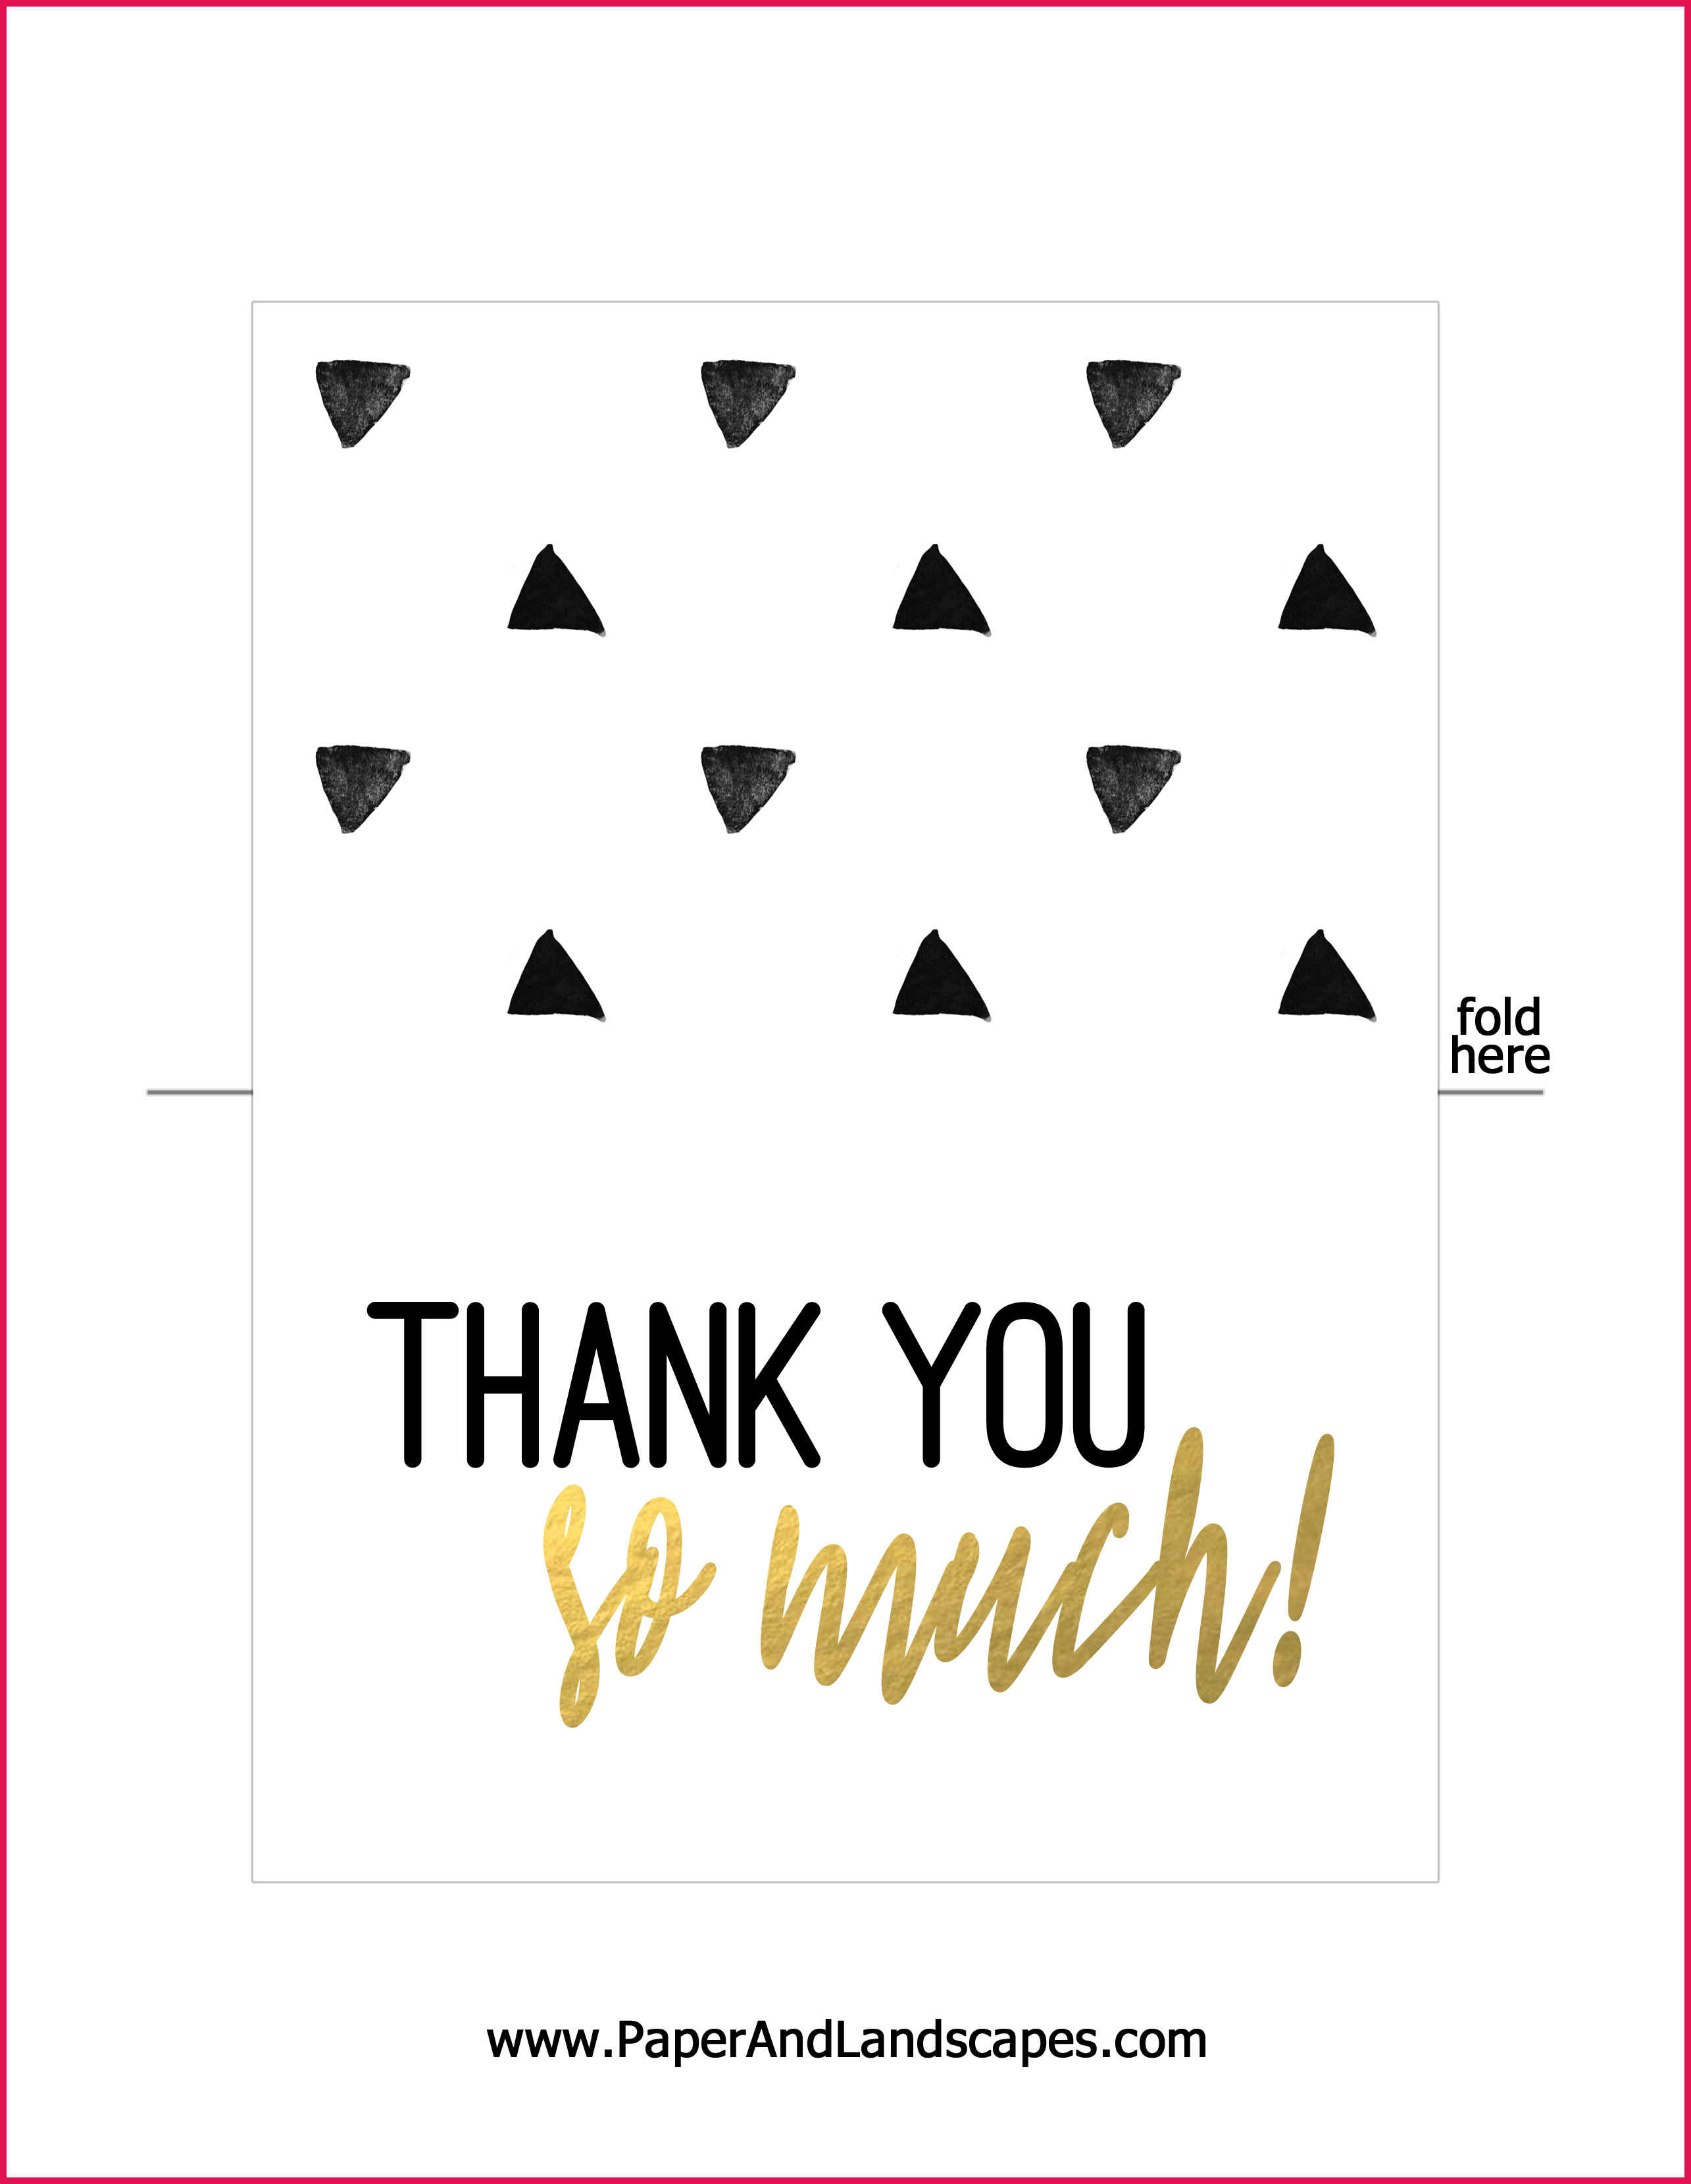 Free Printable Thank You Cards | Sop Examples - Free Printable Custom Thank You Cards